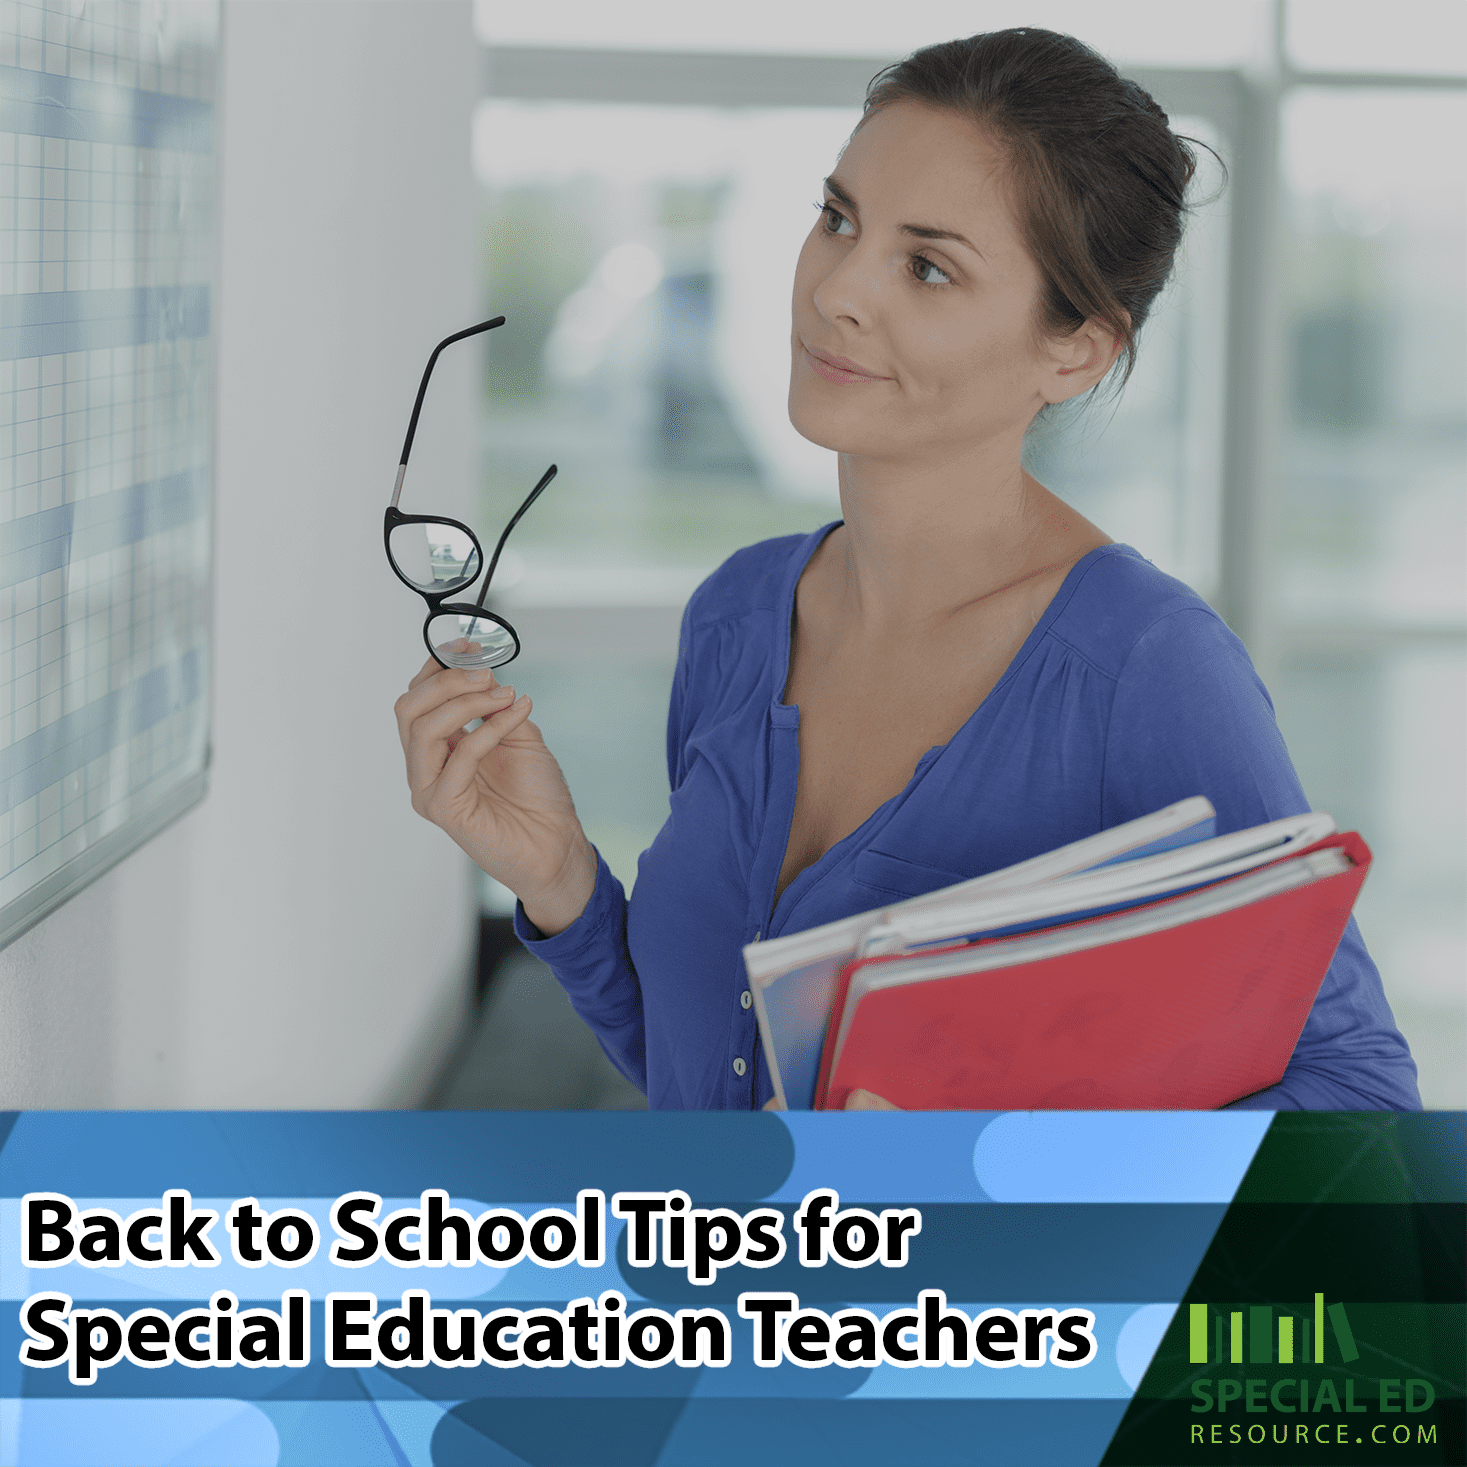 Female teacher looks at her calendar in anticipation of the new school year starting soon. She needs back to school tips for special education teachers.